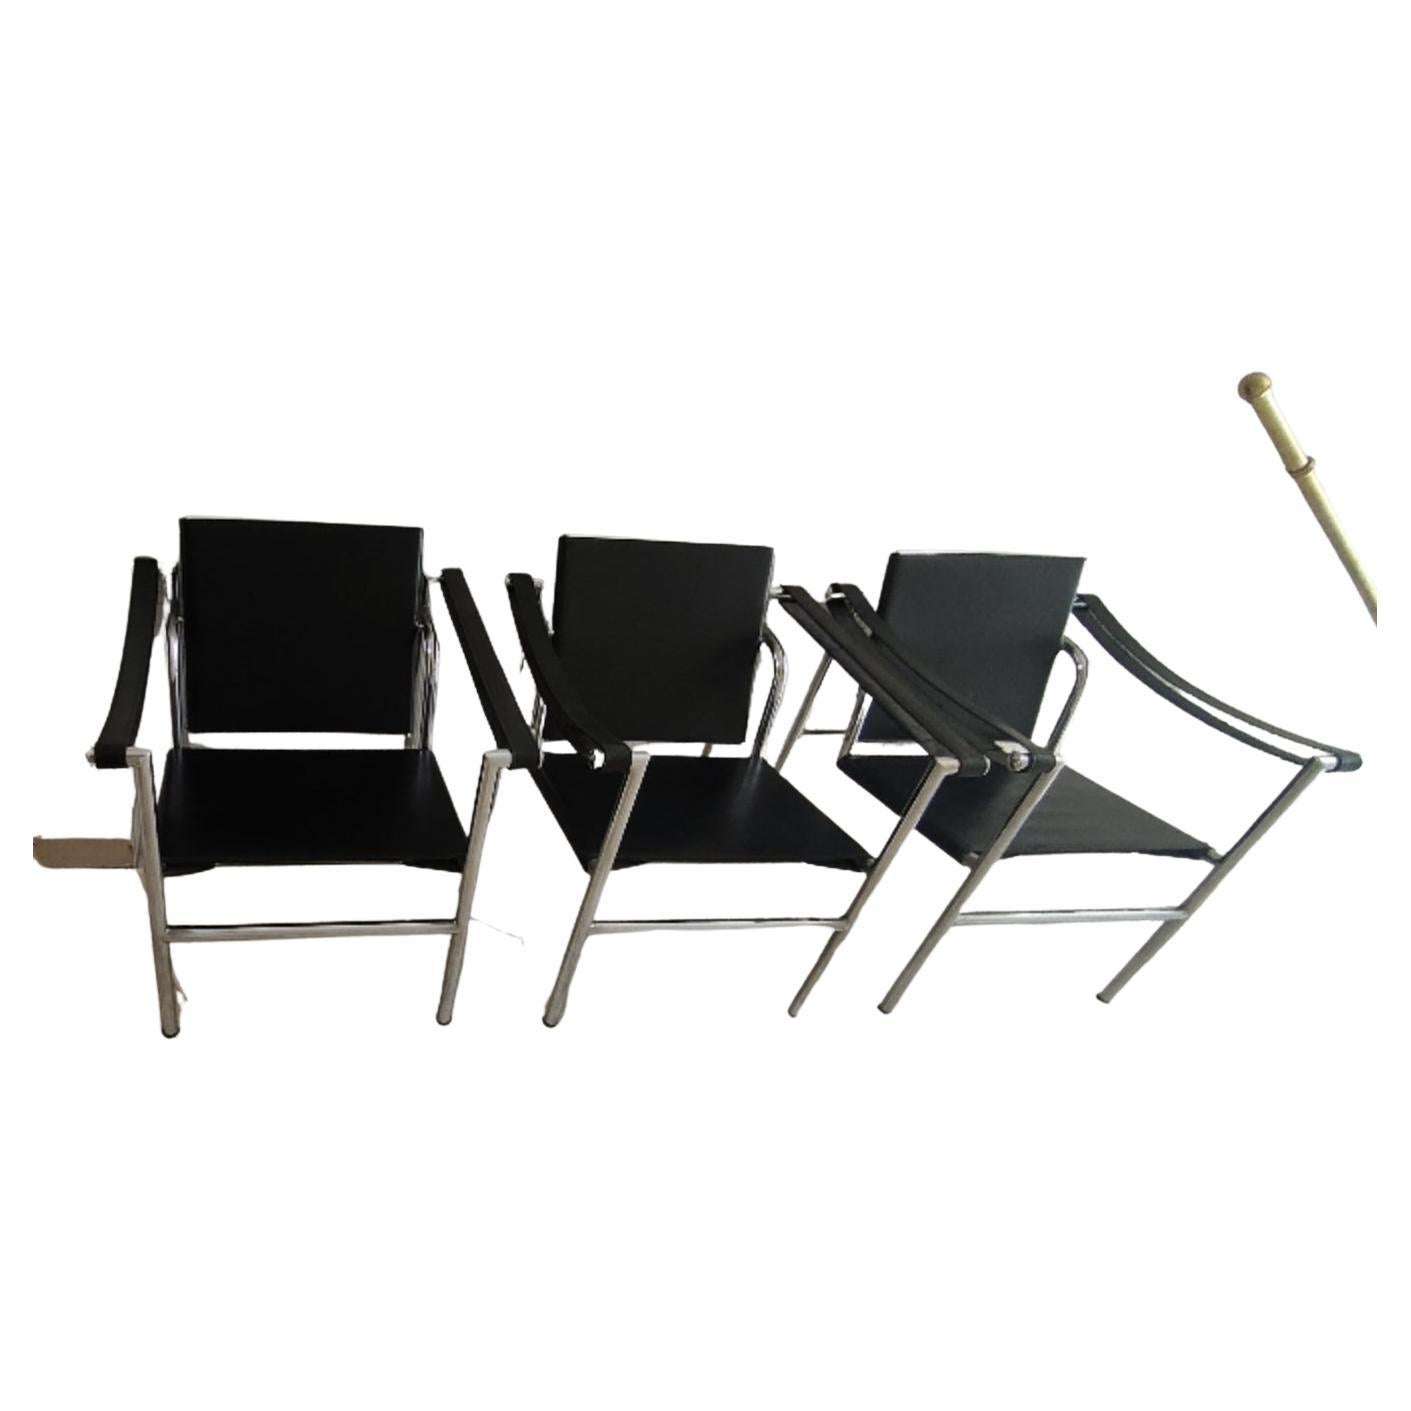 3 Armchairs mod. LC 1 1970s Le Corbusier  - Cassina -Made in ITALY For Sale